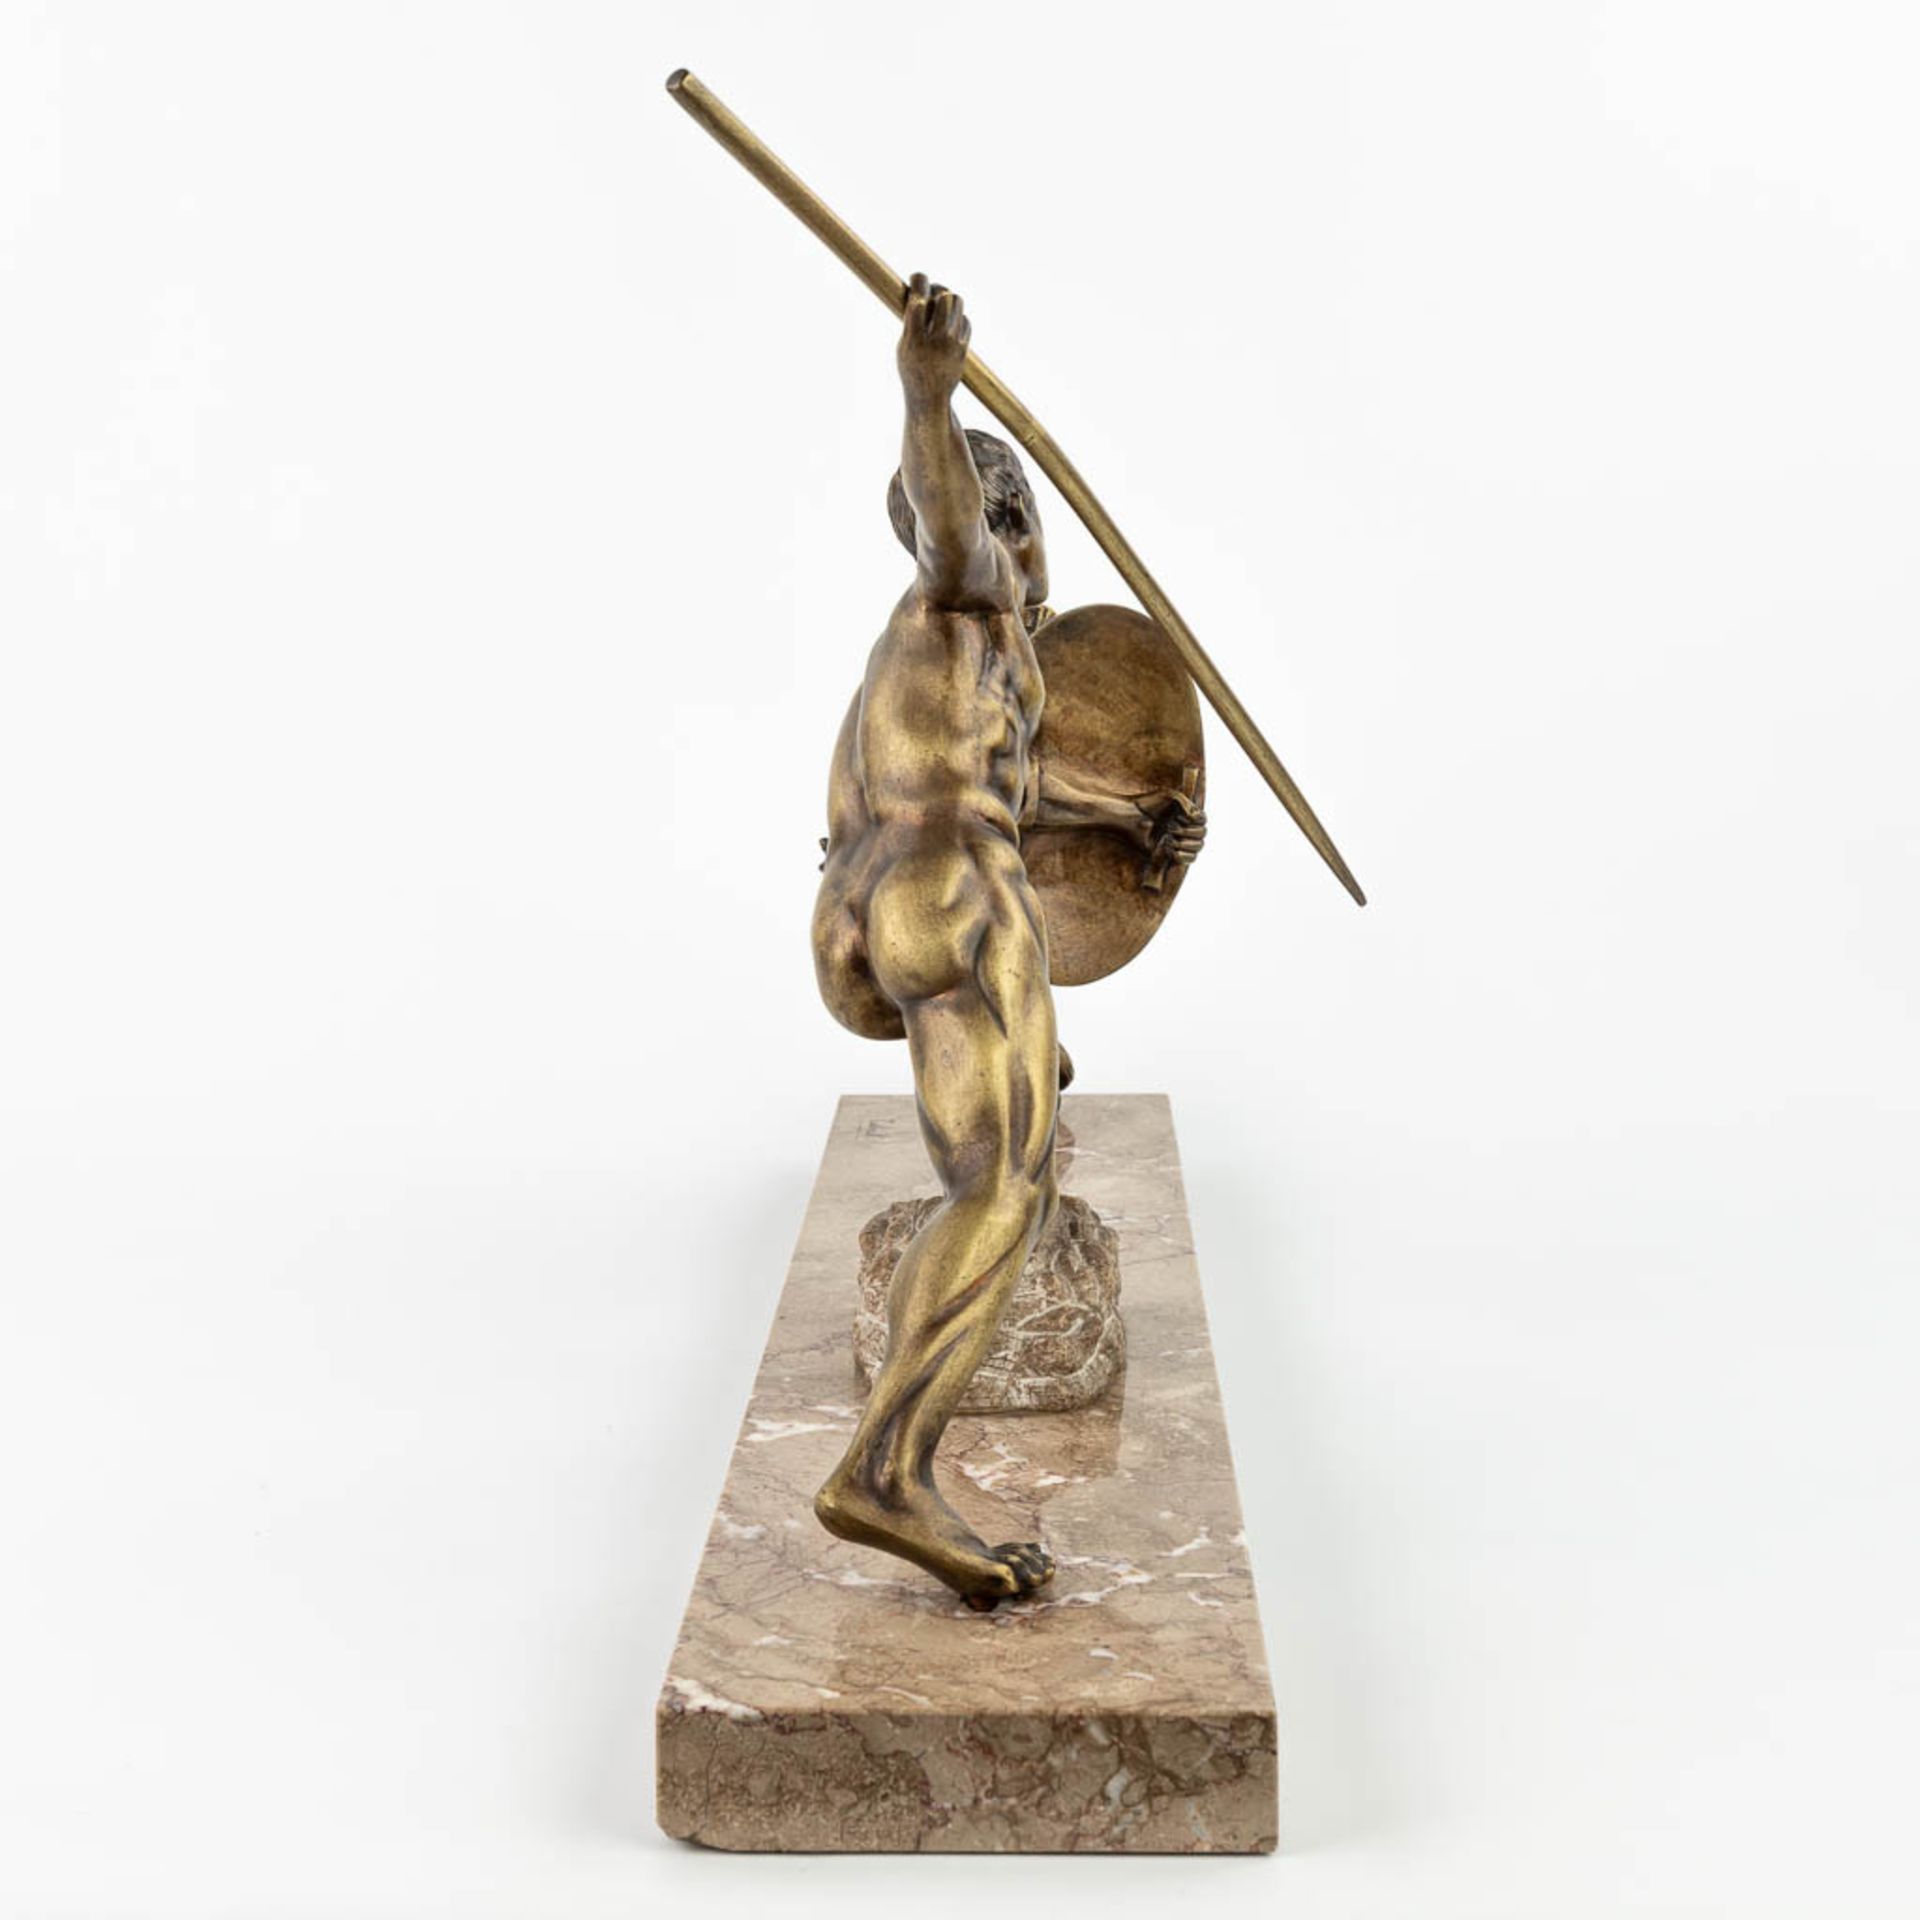 R. TUBACK (XIX-XX) 'Hunter with lion' an art deco statue made of bronze and mounted on a marble base - Image 4 of 11